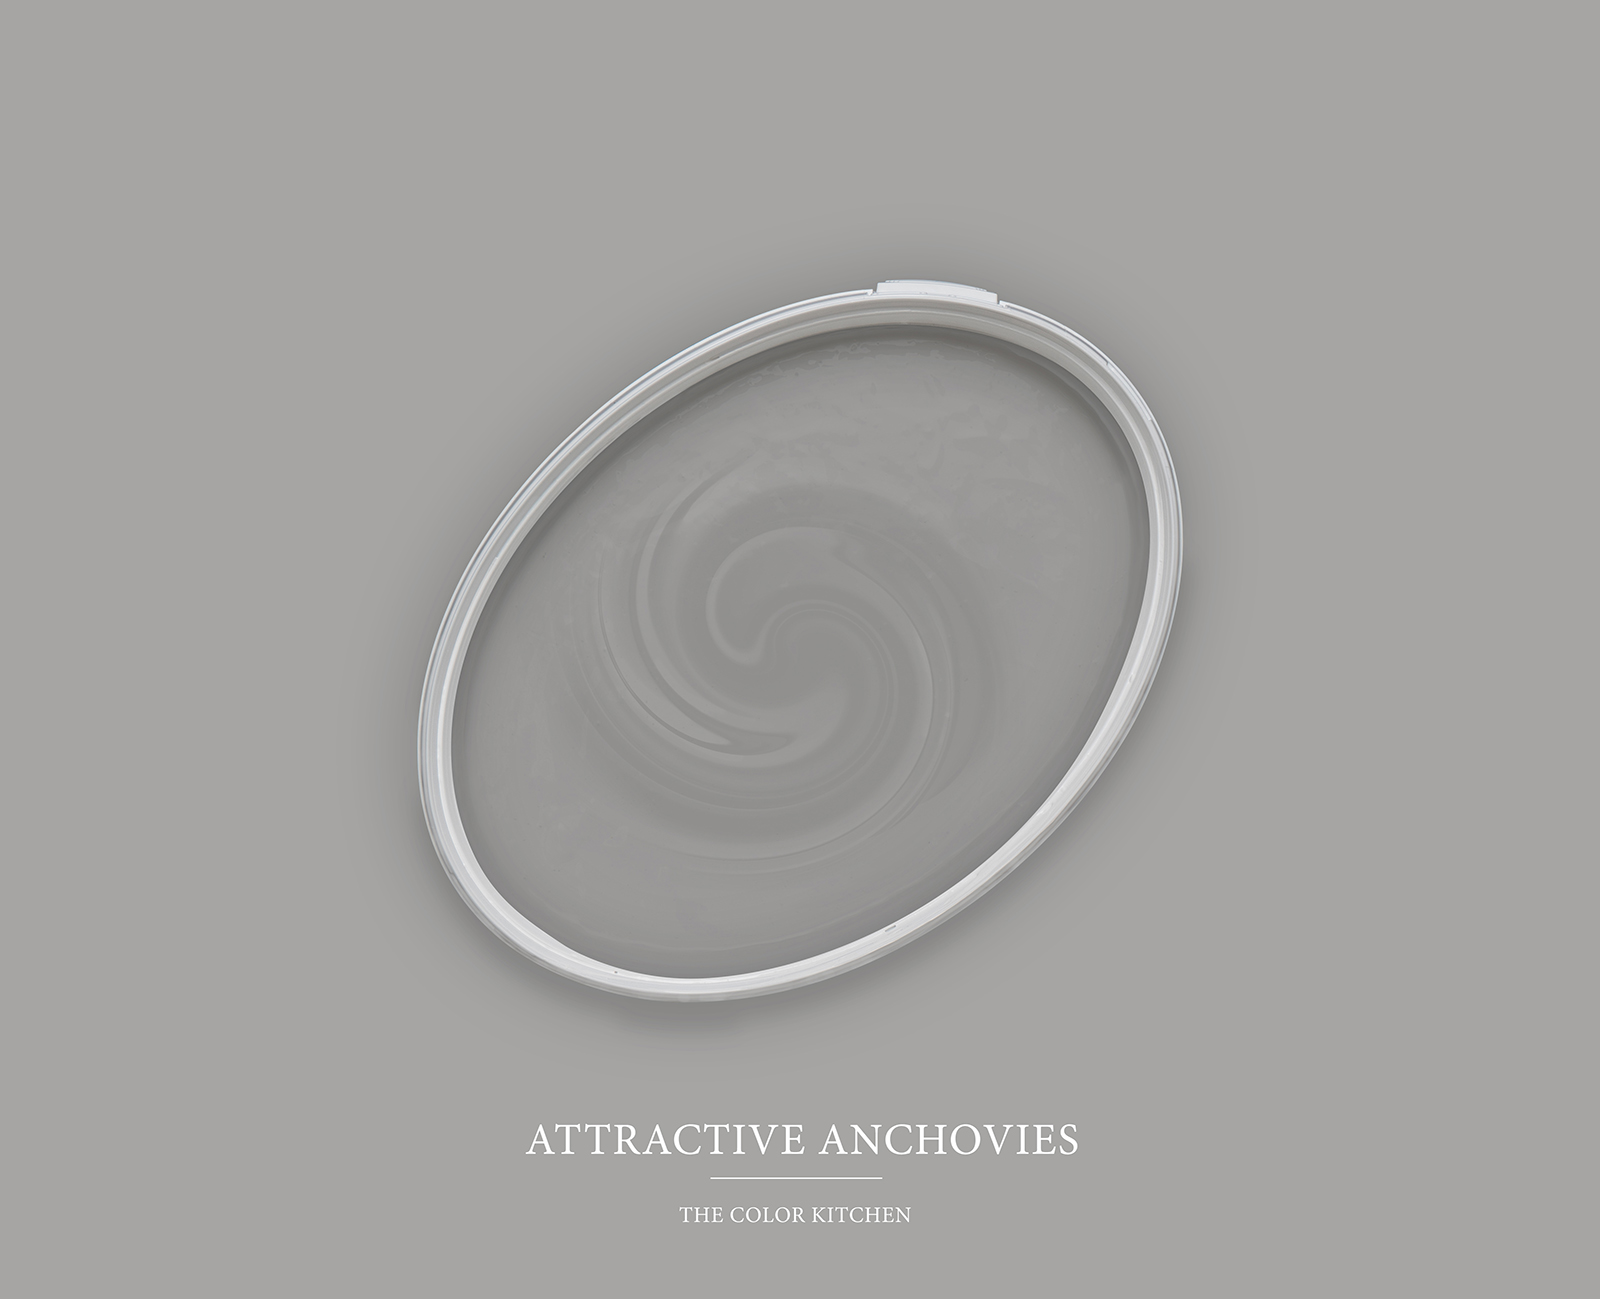 Wall Paint TCK1011 »Attractive Anchovies« in warm silver-grey – 5.0 litre
